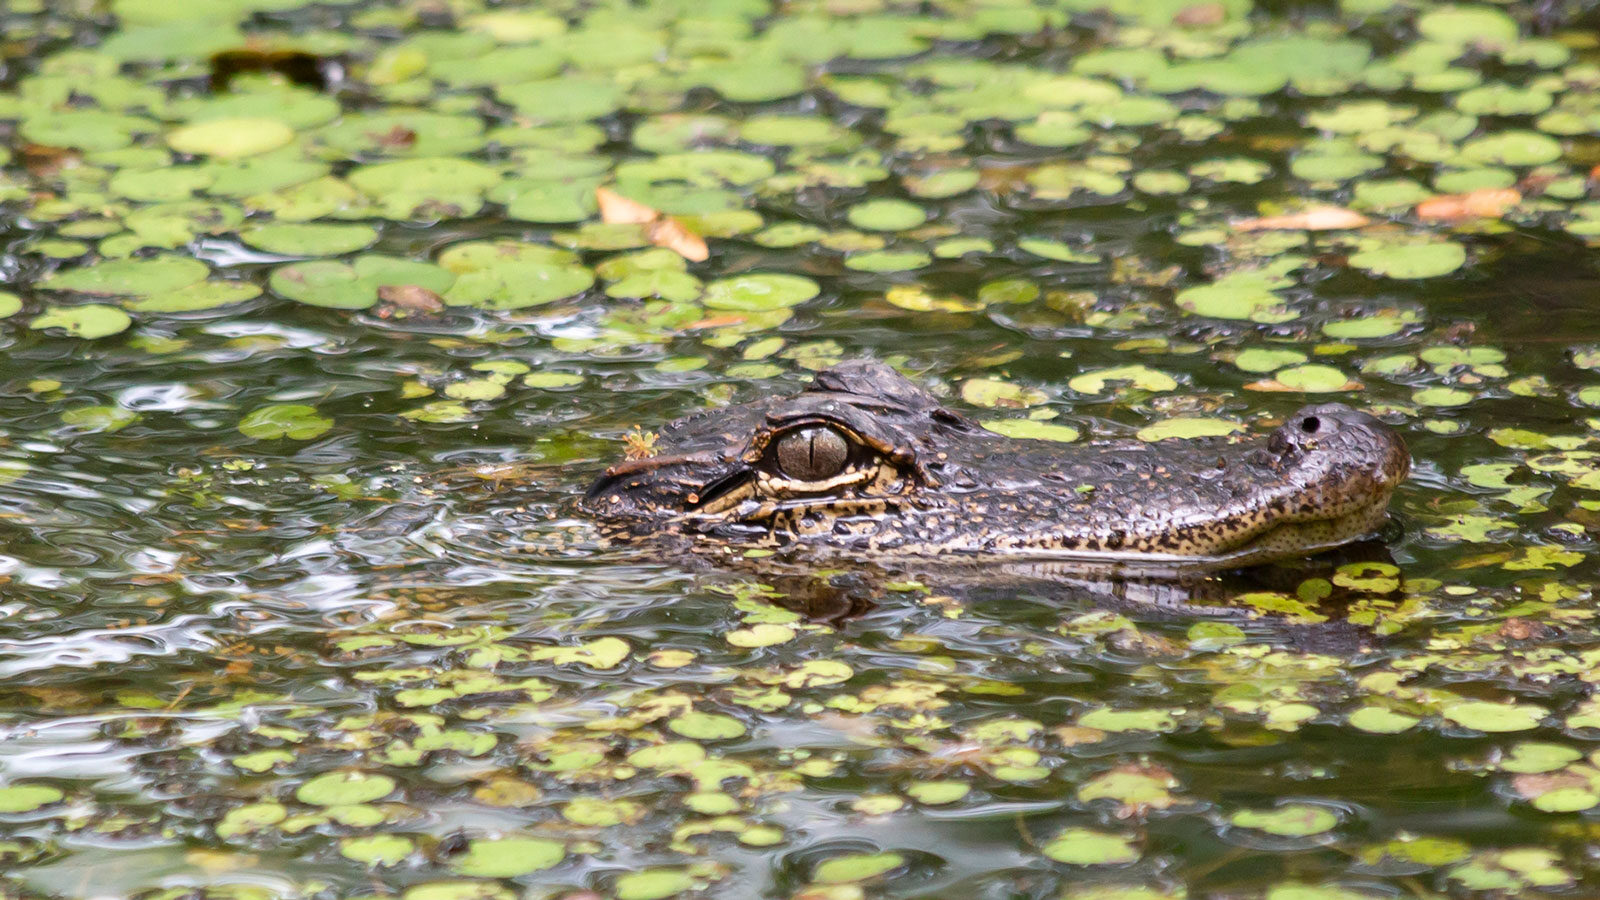 American alligator swimming in leafy water